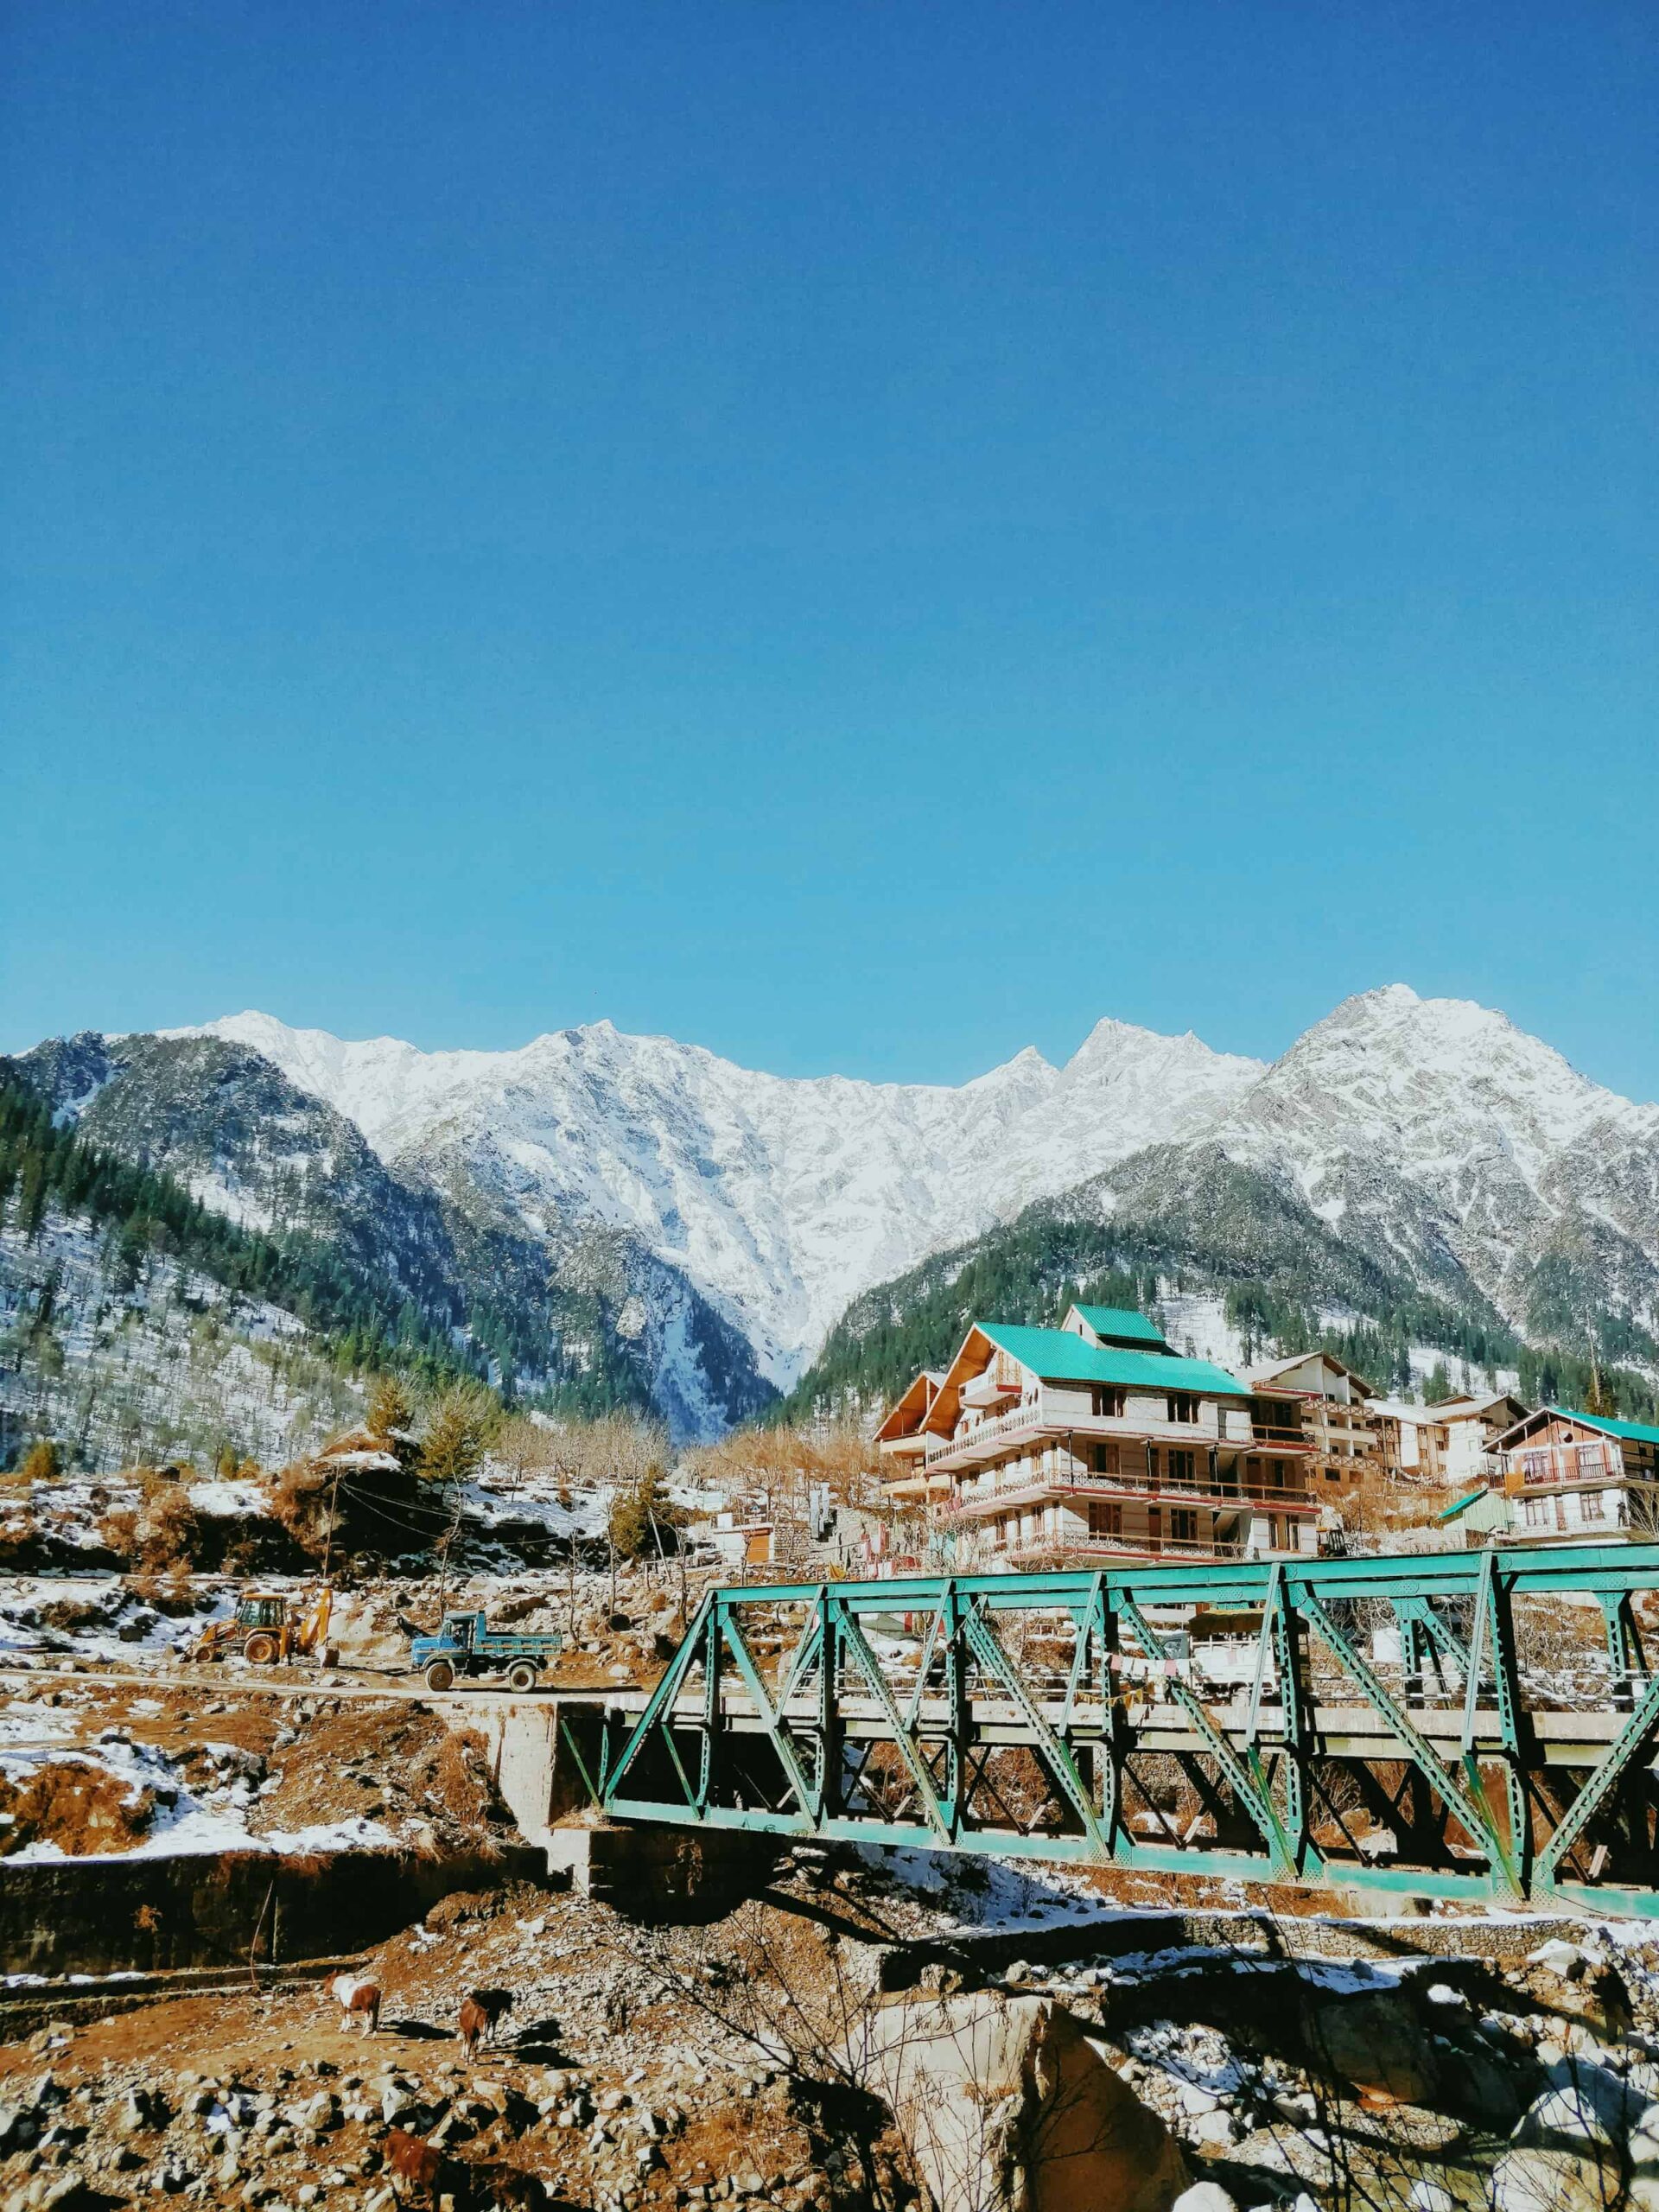 manali in india is one of the most beautiful places to visit in india